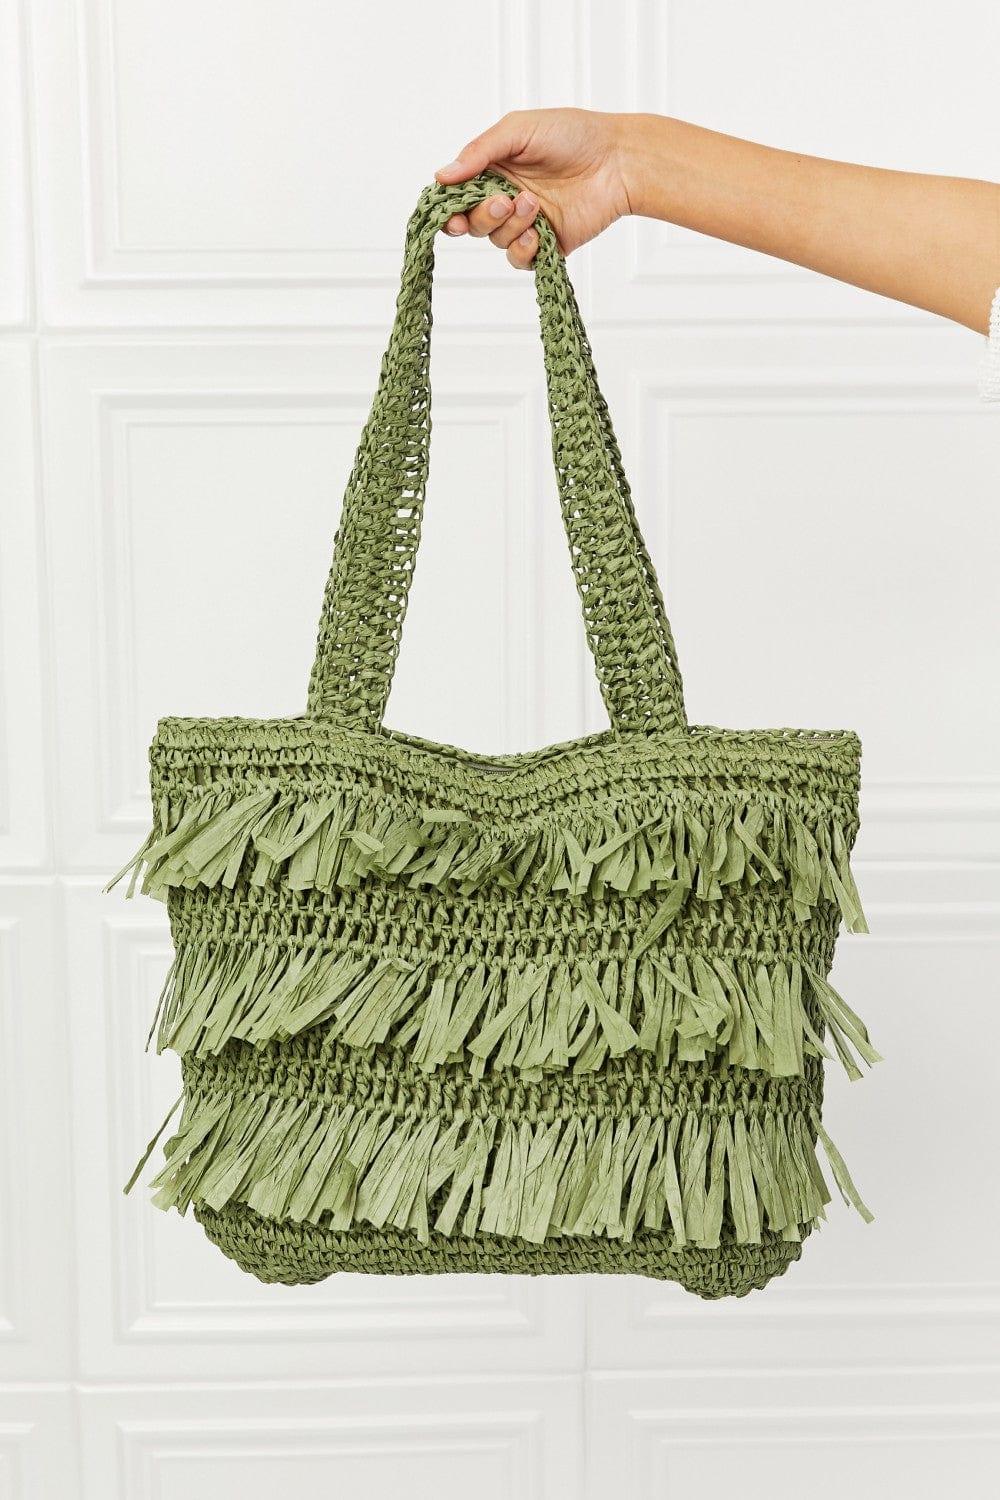 Fame Accessories Olive / One Size Fame The Last Straw Fringe Straw Tote Bag